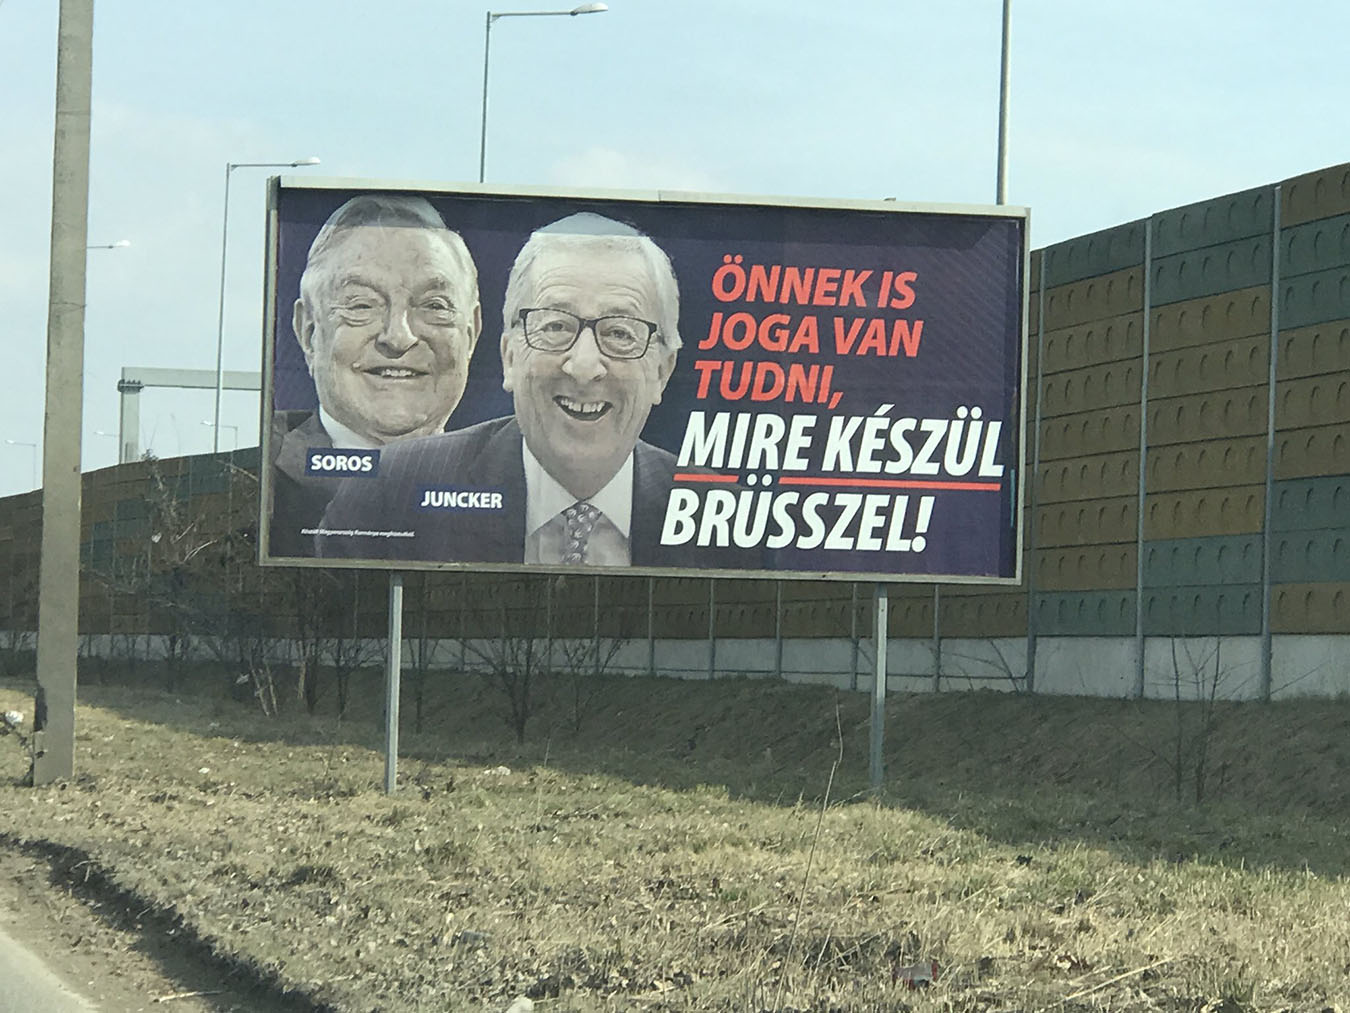 Billboard sponsored by the Hungarian government depicting Juncker conspiring with Soros: “You, too, have the right to know what Brussels is up to!” Photo by Valerie Hopkins.